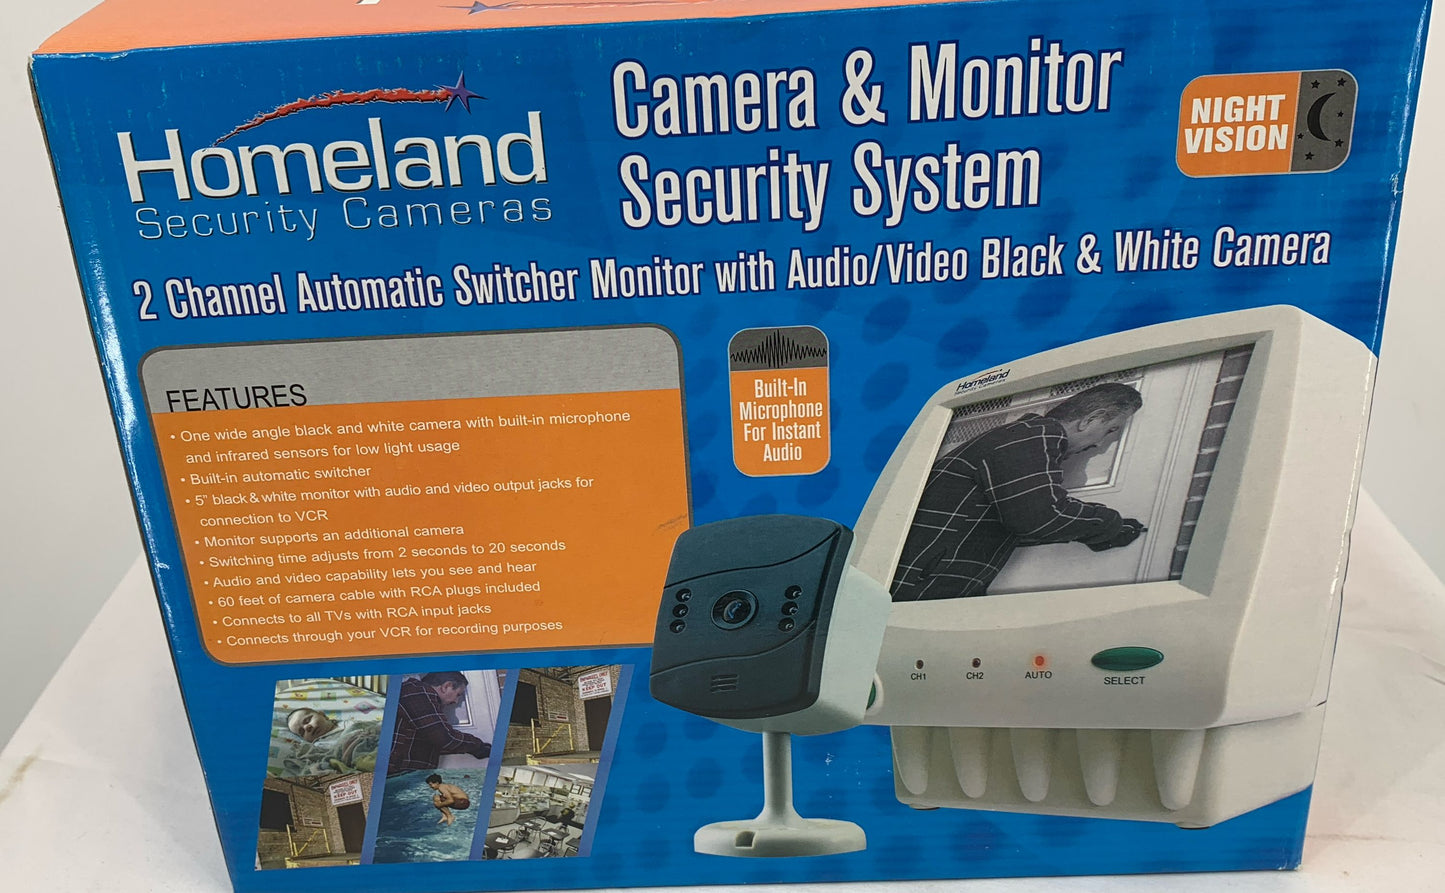 New Homeland Camera & Monitor Security System 2 Channel Audio/Video Model 01875